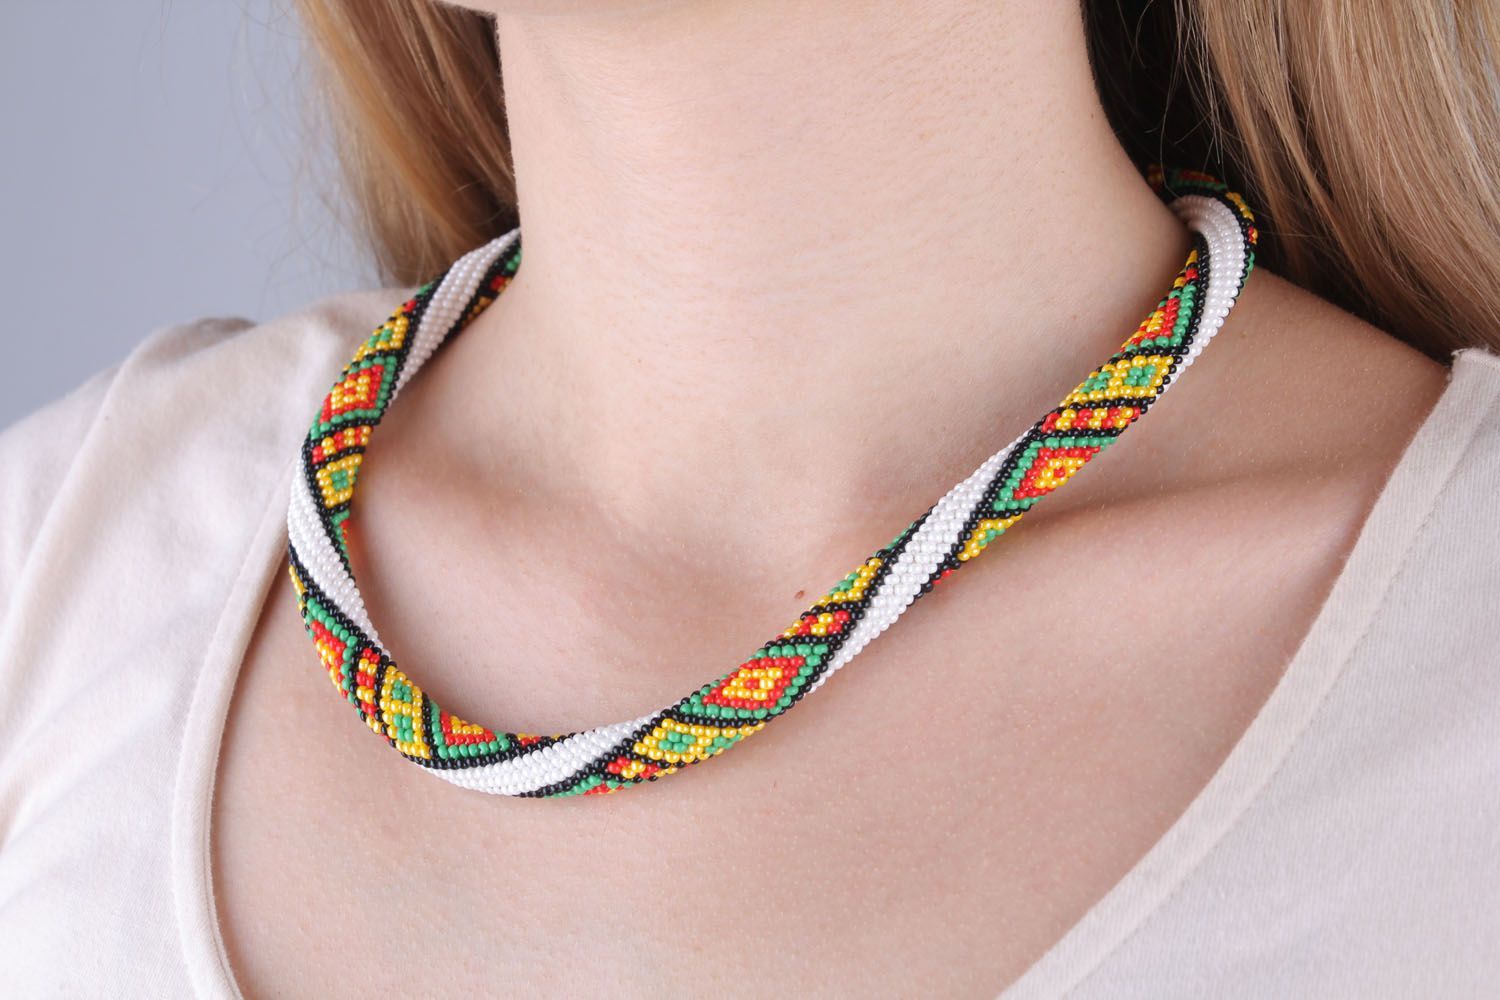 Braided cord necklace photo 5